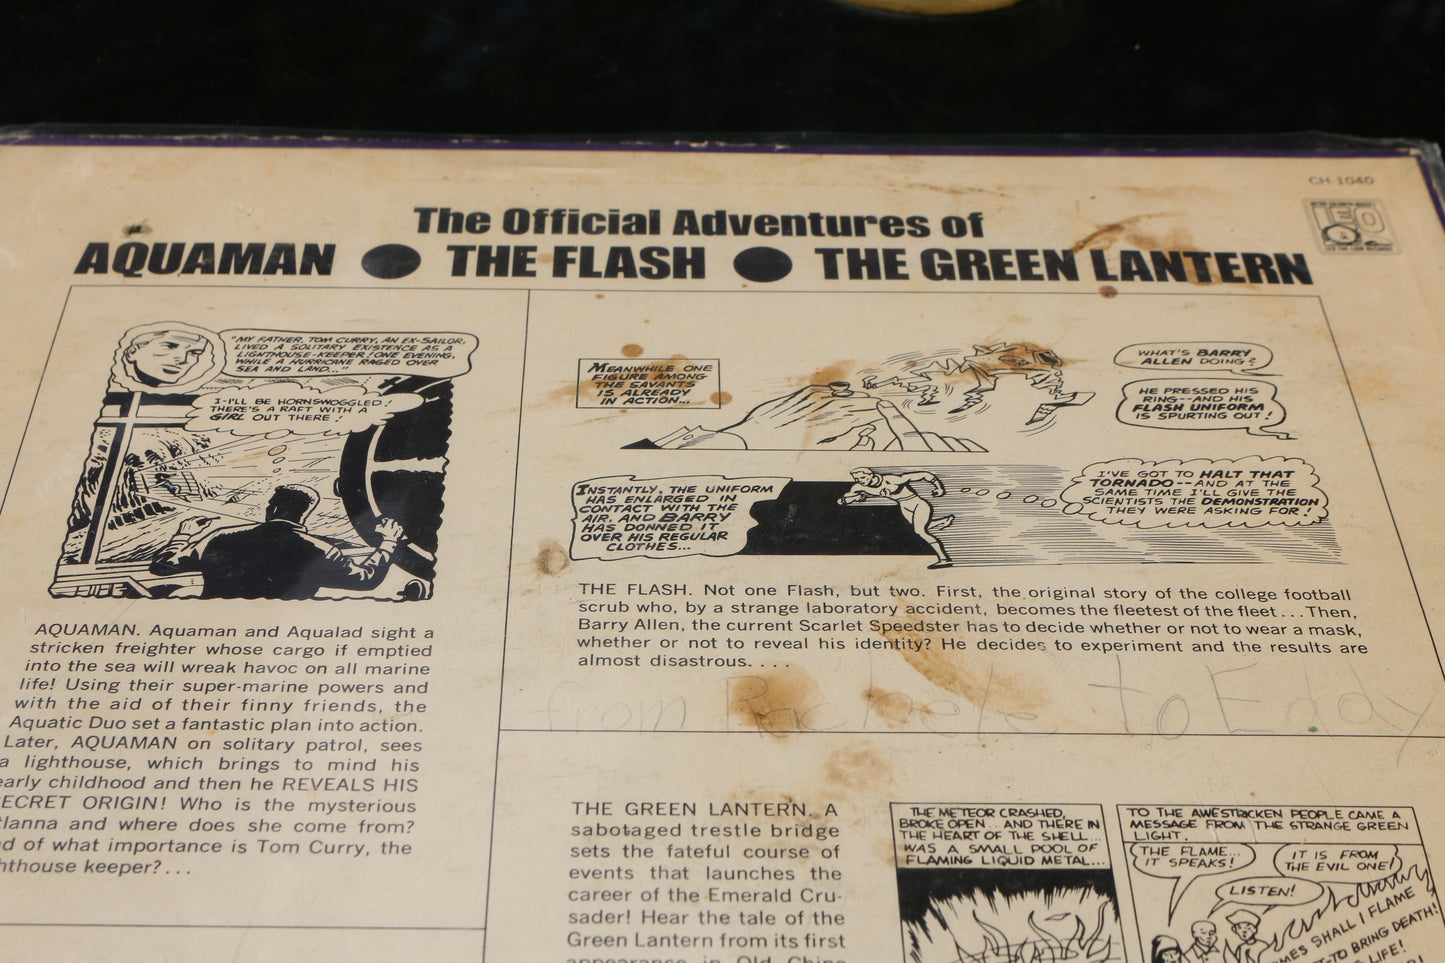 1967 THE OFFICIAL ADVENTURES OF AQUAMAN, THE FLASH, GREEN LANTERN VINYL CH-1040